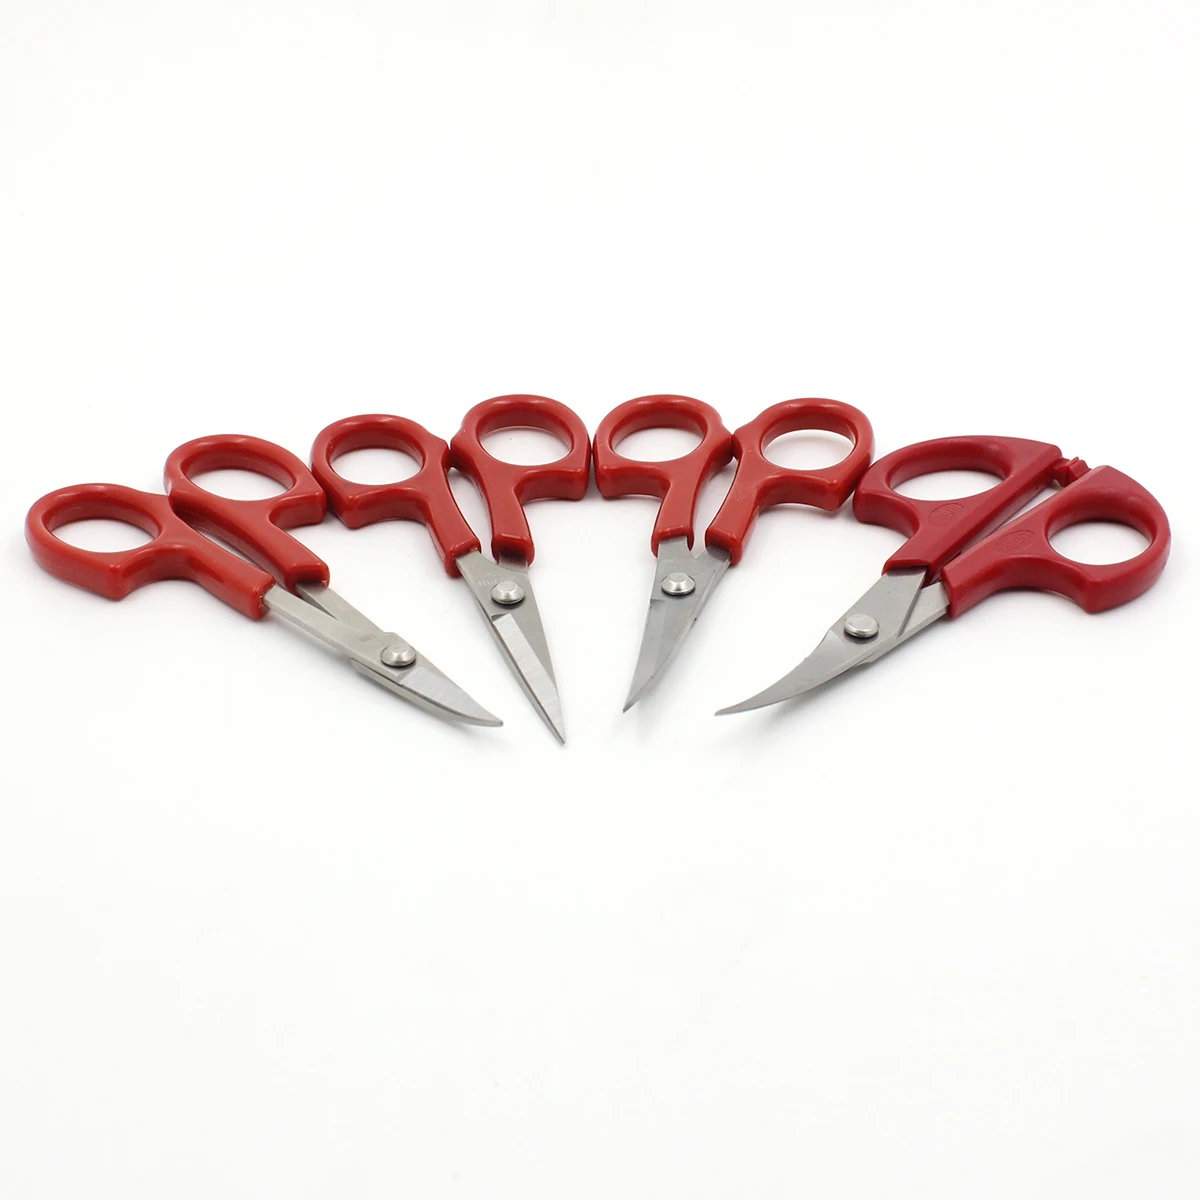 Vintage red scissors maker badge gift for artist knitters sewist flair  addition - AliExpress